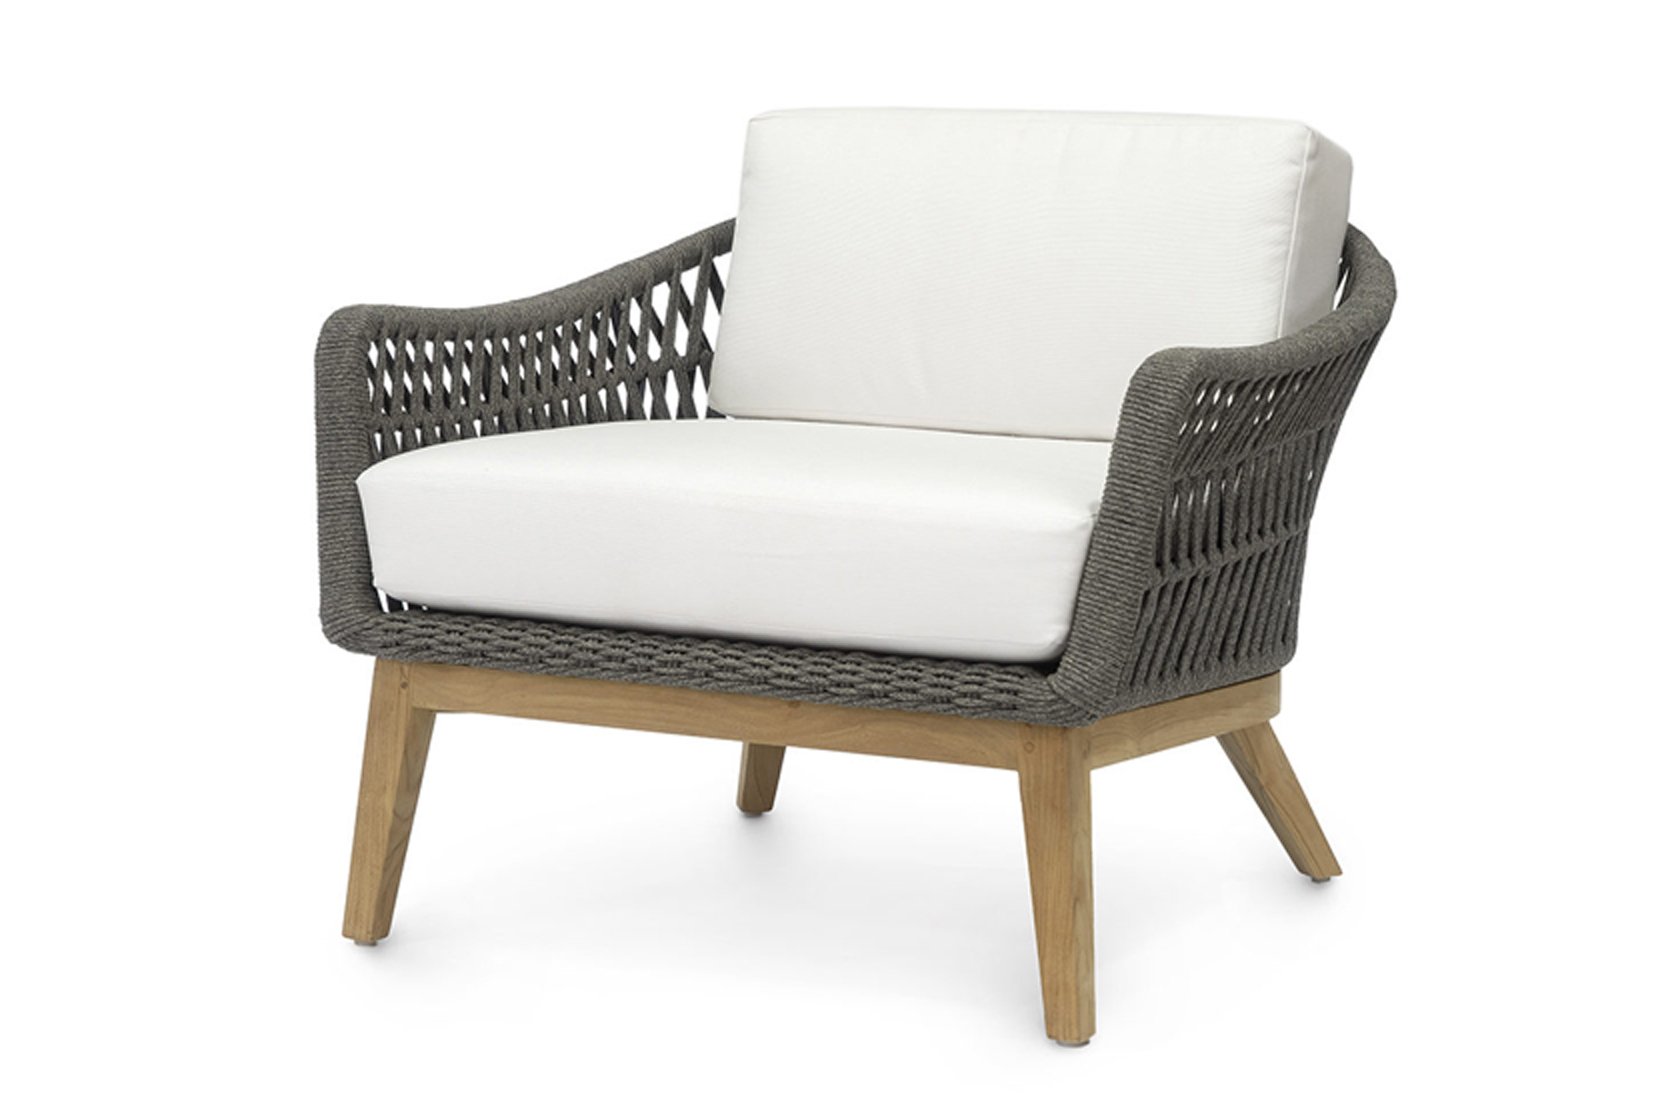 ROOM Sorrento Outdoor Lounge Chair Powder-Coated Aluminum Frame with Hand Woven Heathered Charcoal Grey Synthetic Rope Natural Teak Golden Brown Wood Legs White Loose Cushions Made to Order Customizable ROOM Furniture